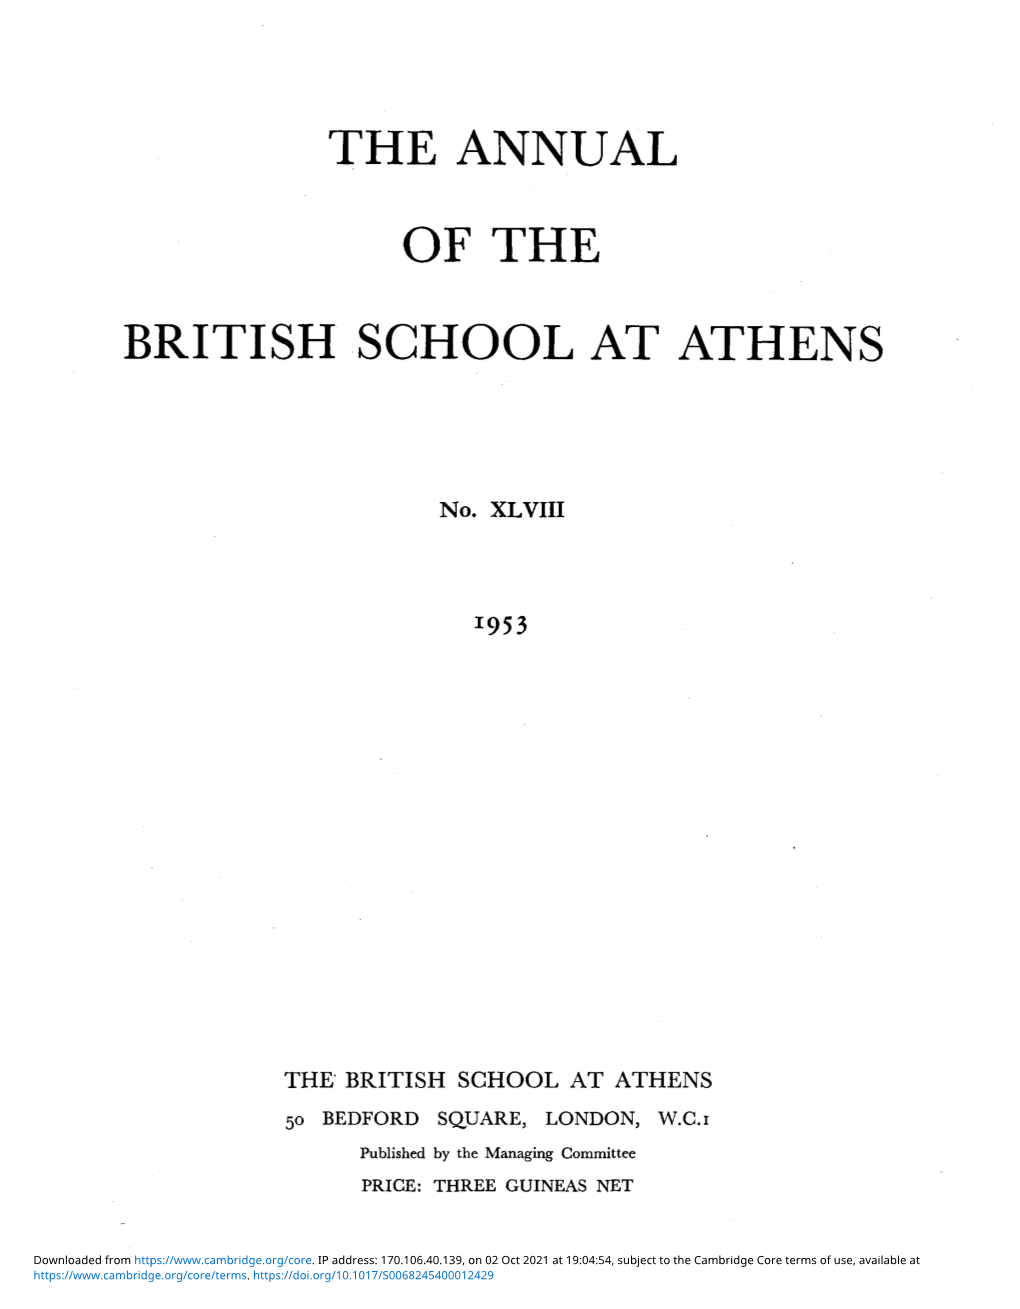 The Annual of the British School at Athens